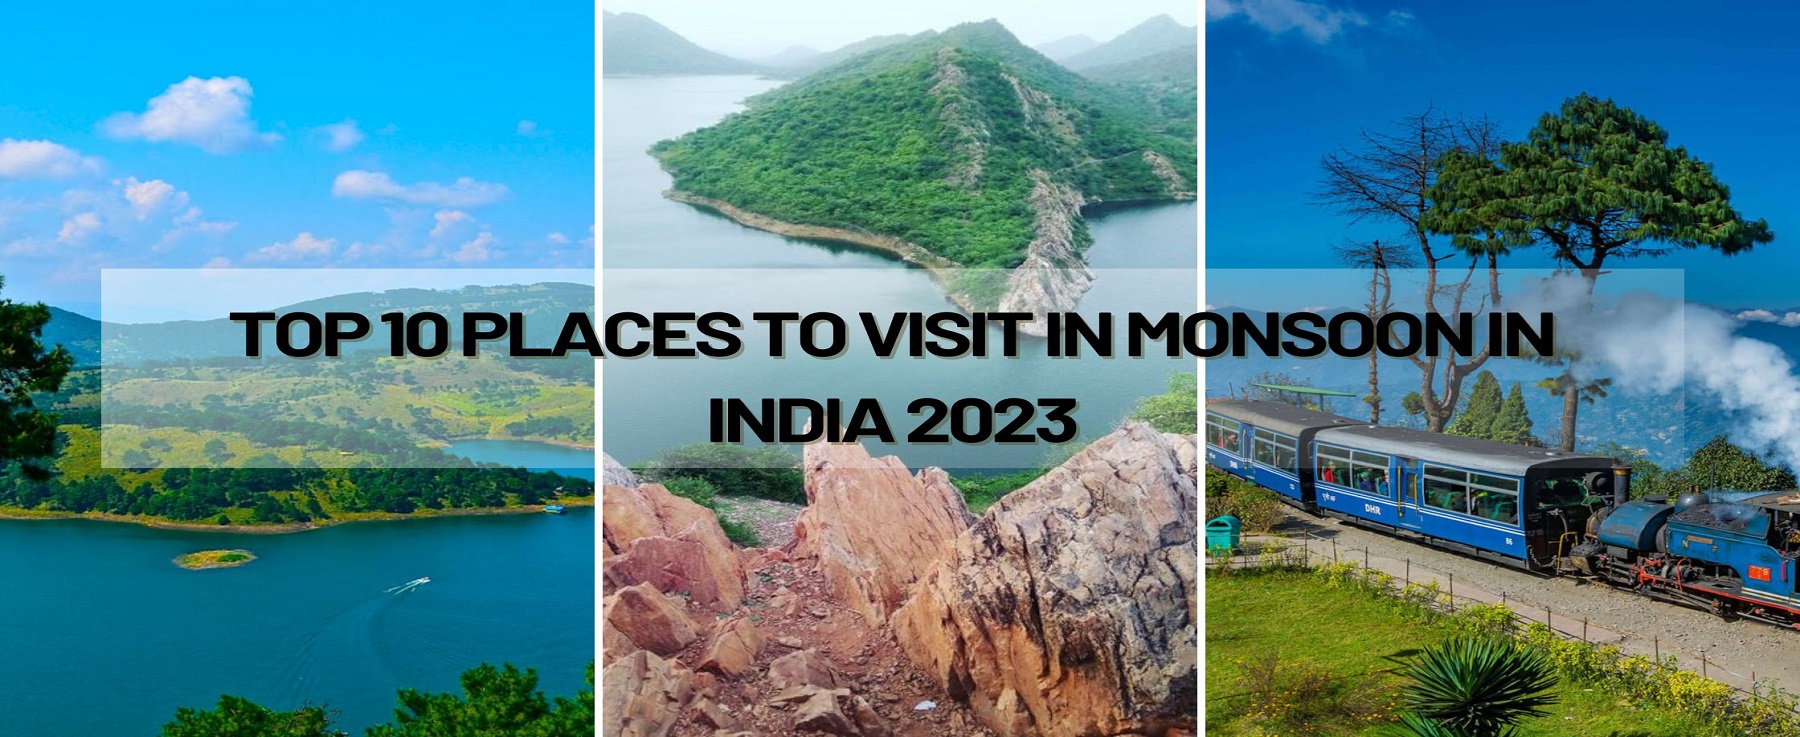 Top 10 Places To Visit In Monsoon In India 2023